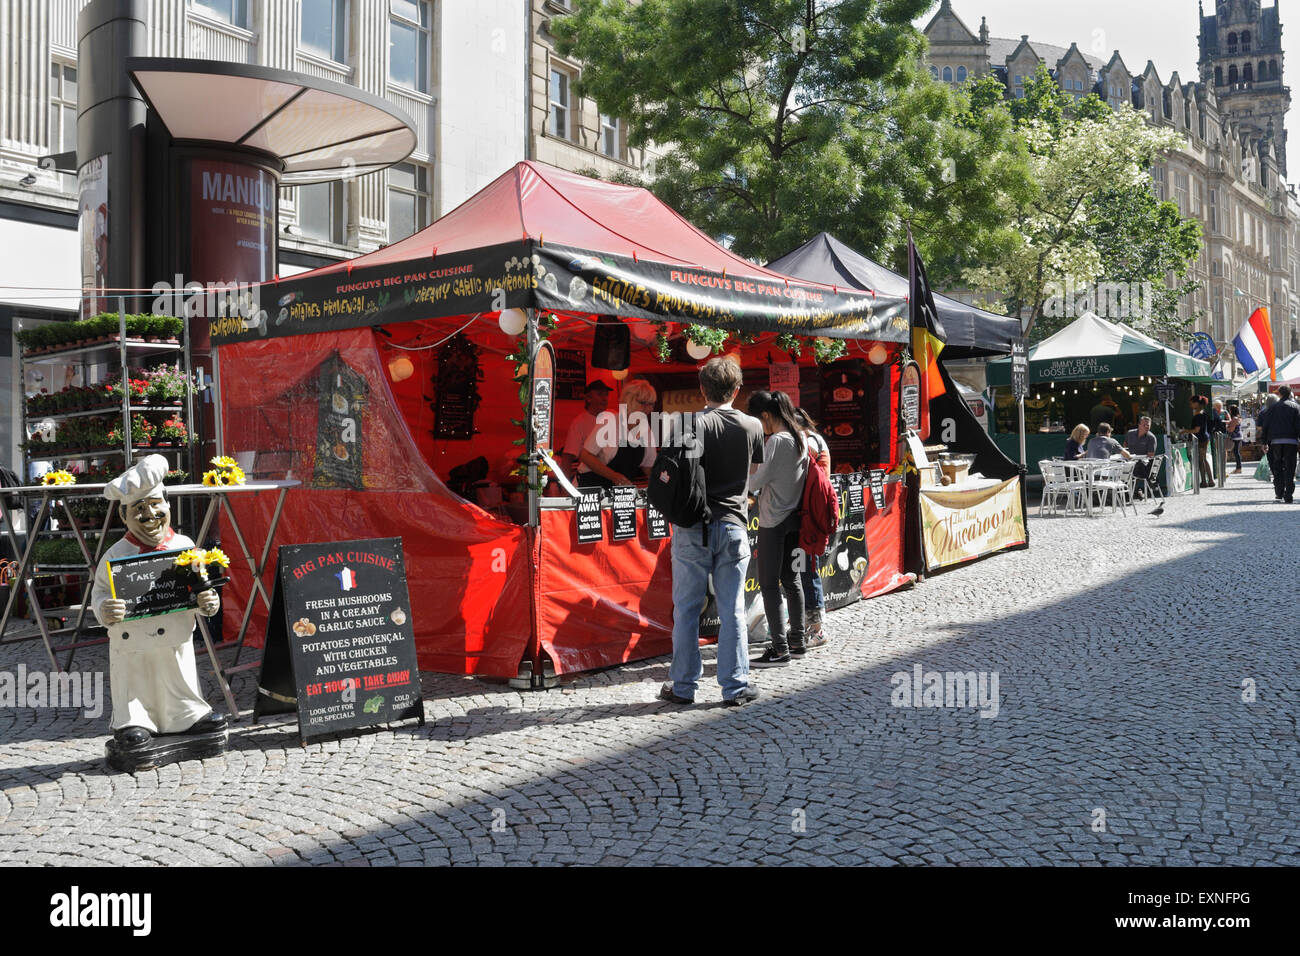 Outdoors street market in Sheffield city centre England, Food stall Stock Photo